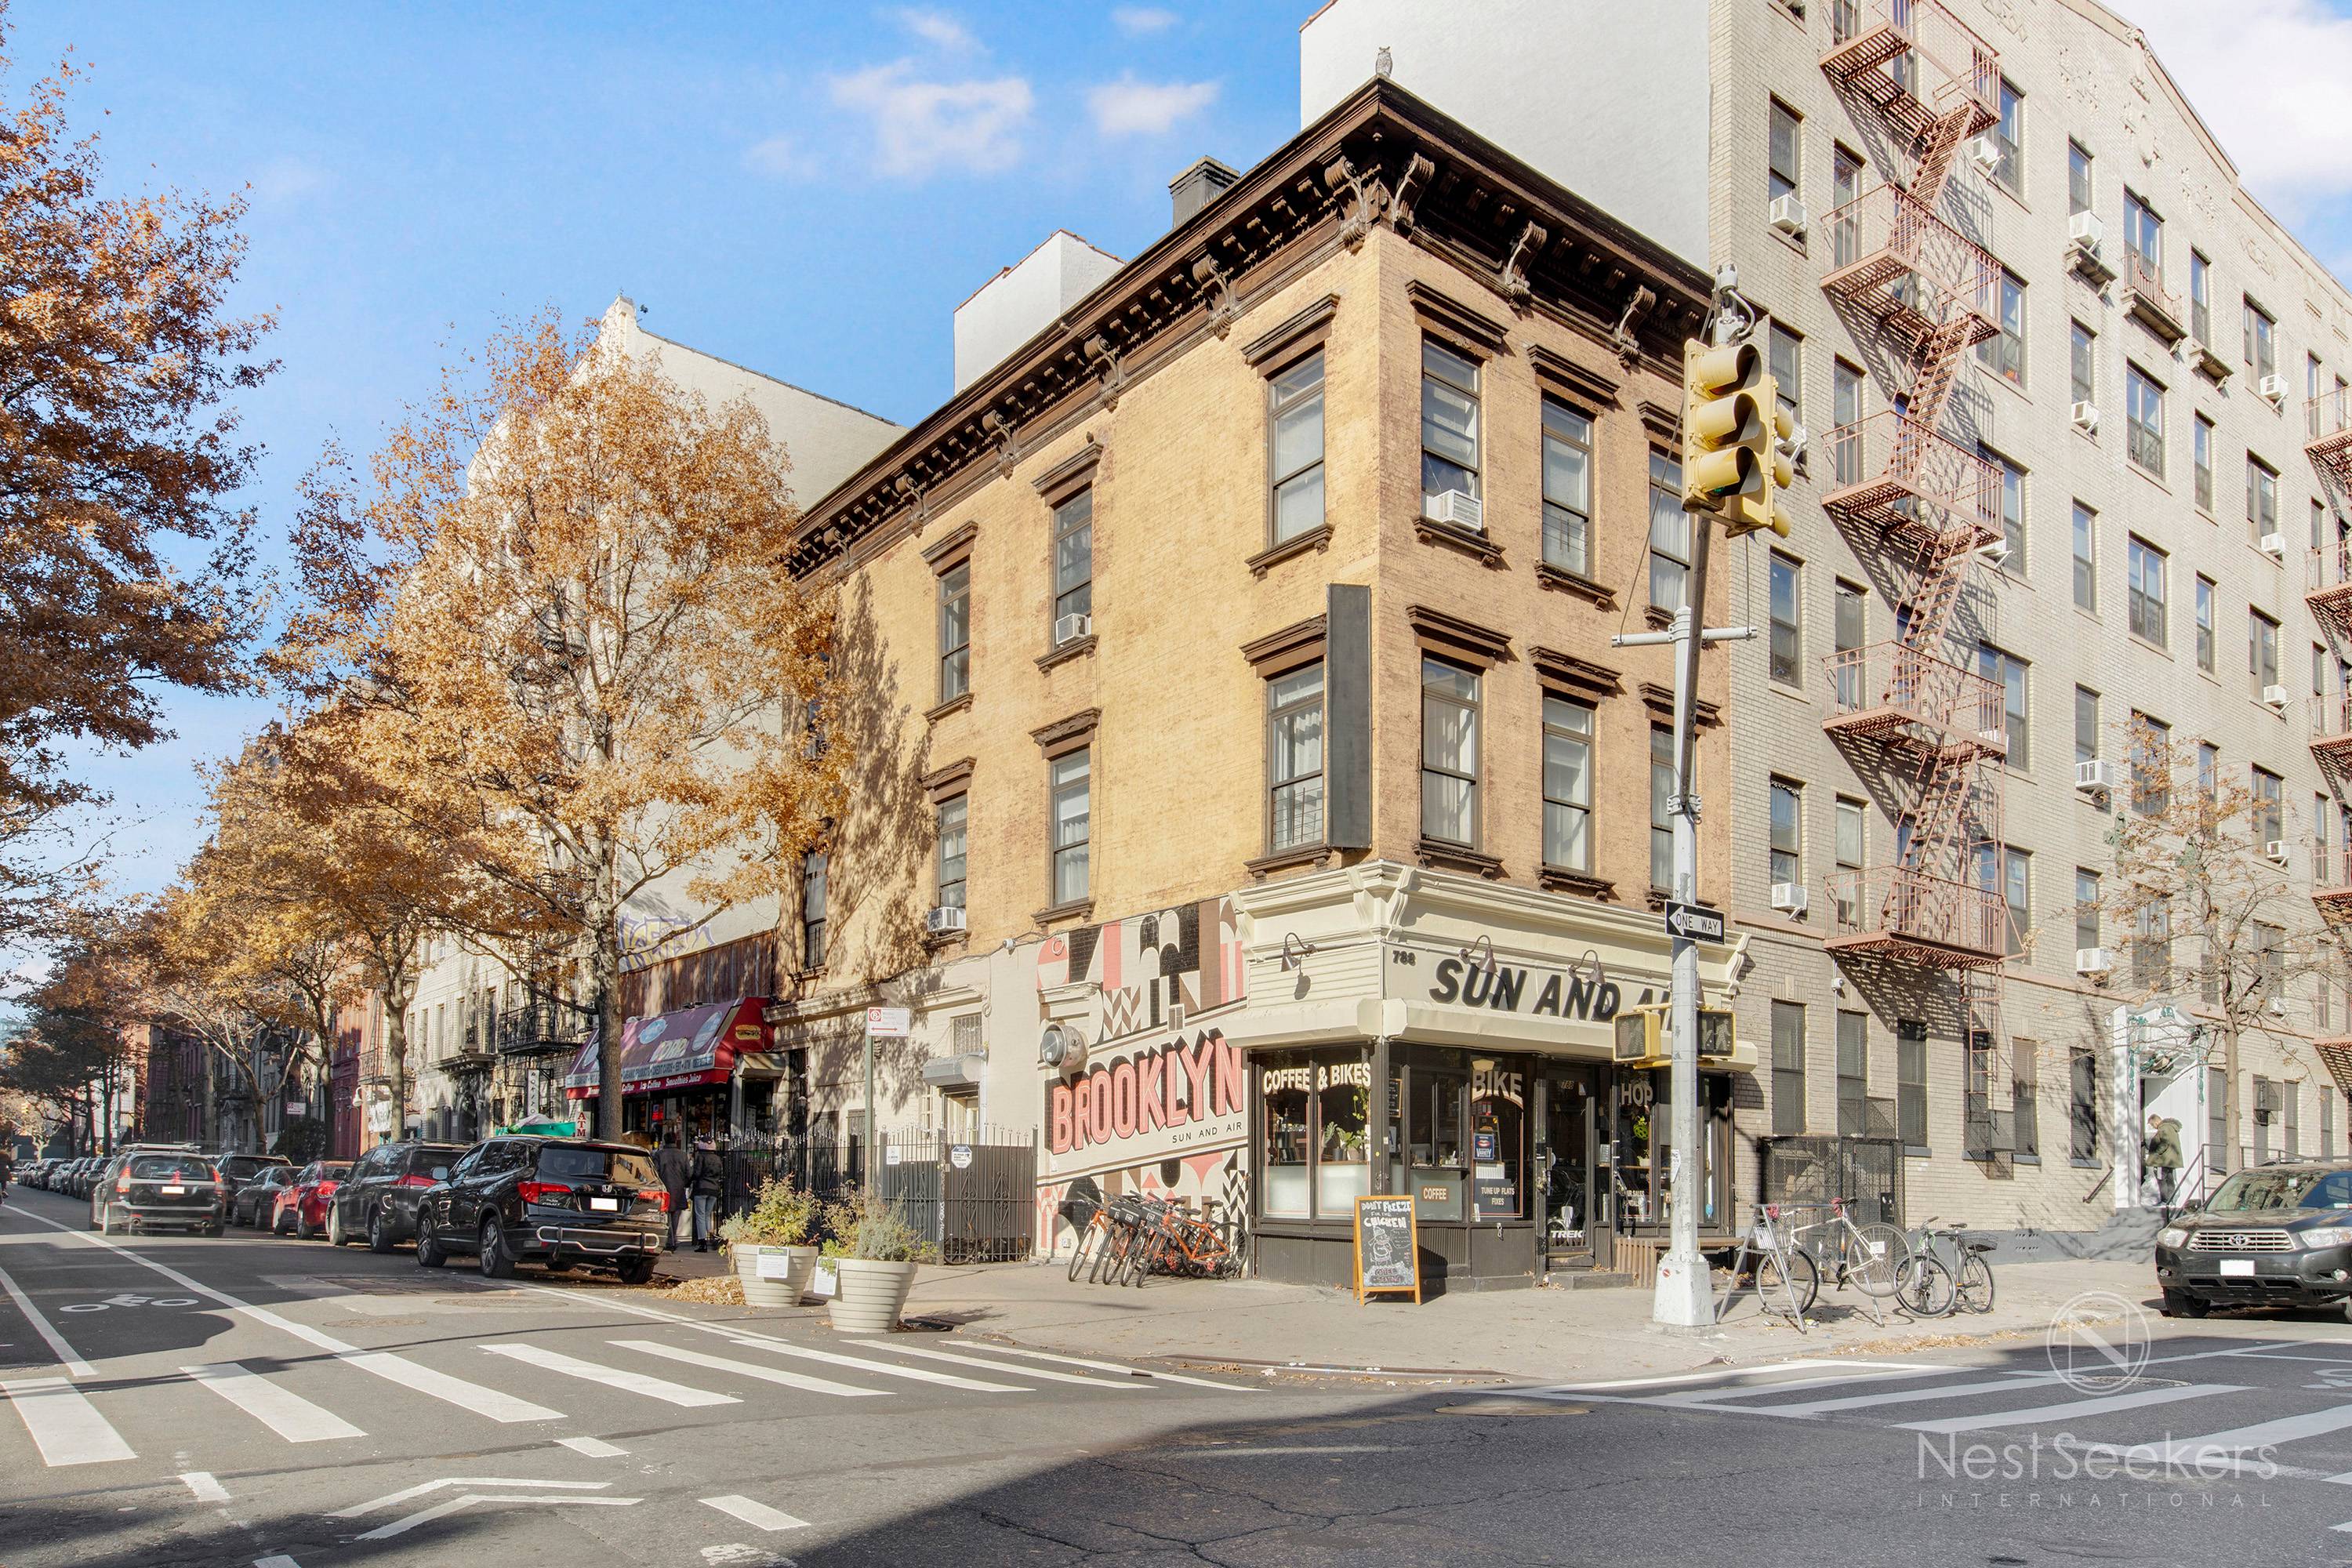 Williamsburg Mixed-Use Property Available for Purchase